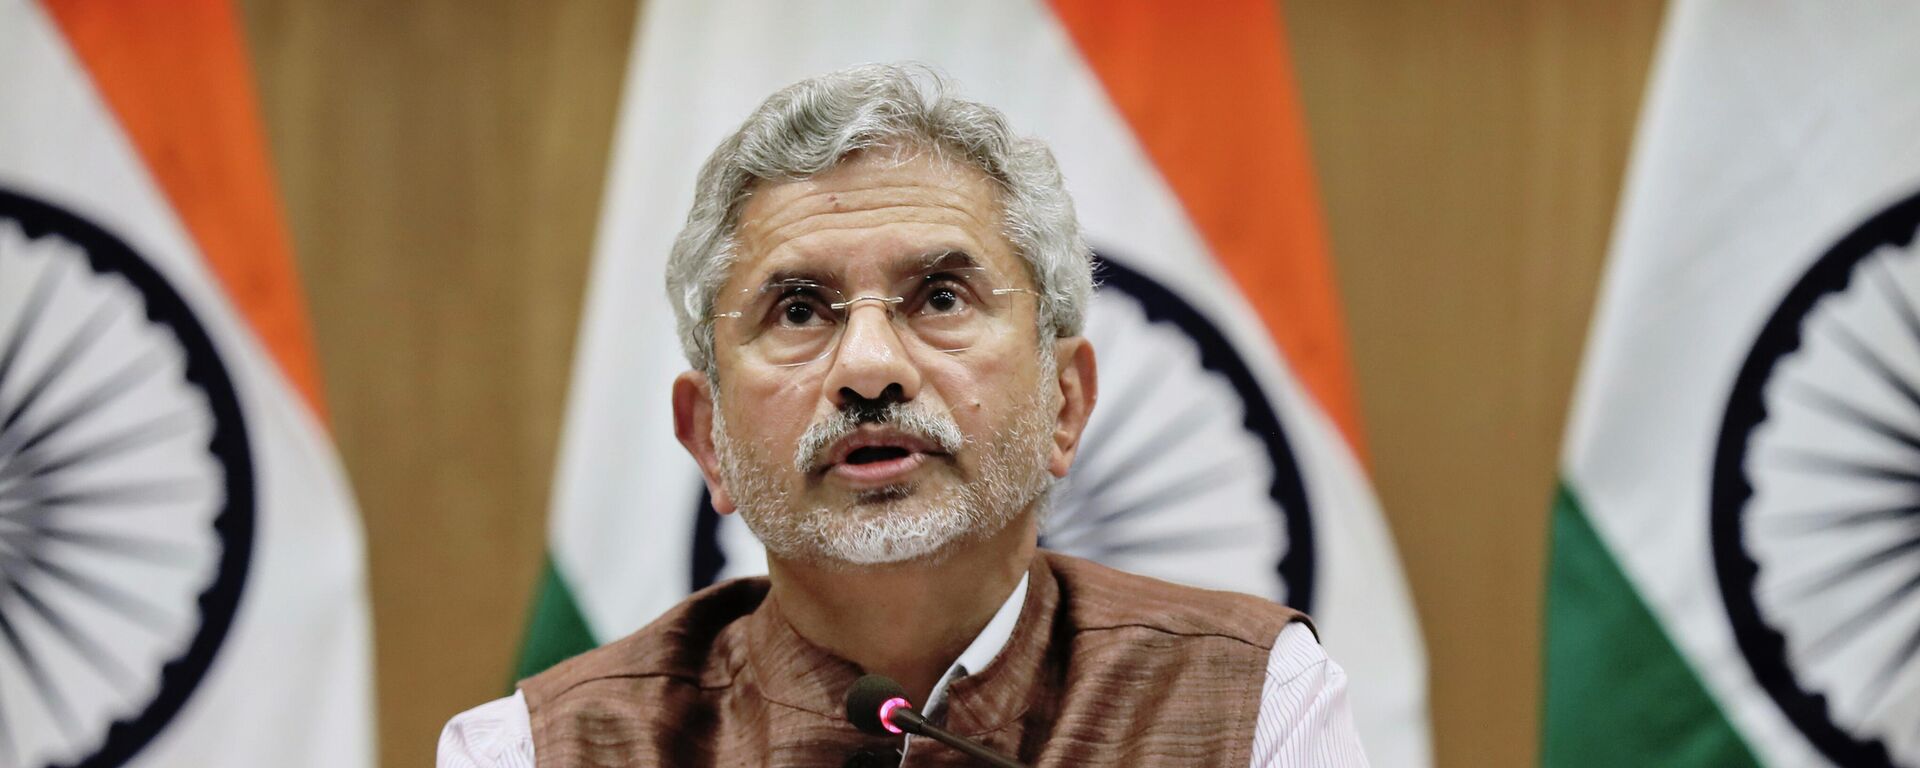 Indian Foreign Minister Subrahmanyam Jaishankar addresses a press conference on the performance of the ministry of external affairs in first 100 days of Prime Minister Narendra Modi's new term in office in New Delhi, India, Tuesday, Sept. 17, 2019. - Sputnik International, 1920, 10.10.2022